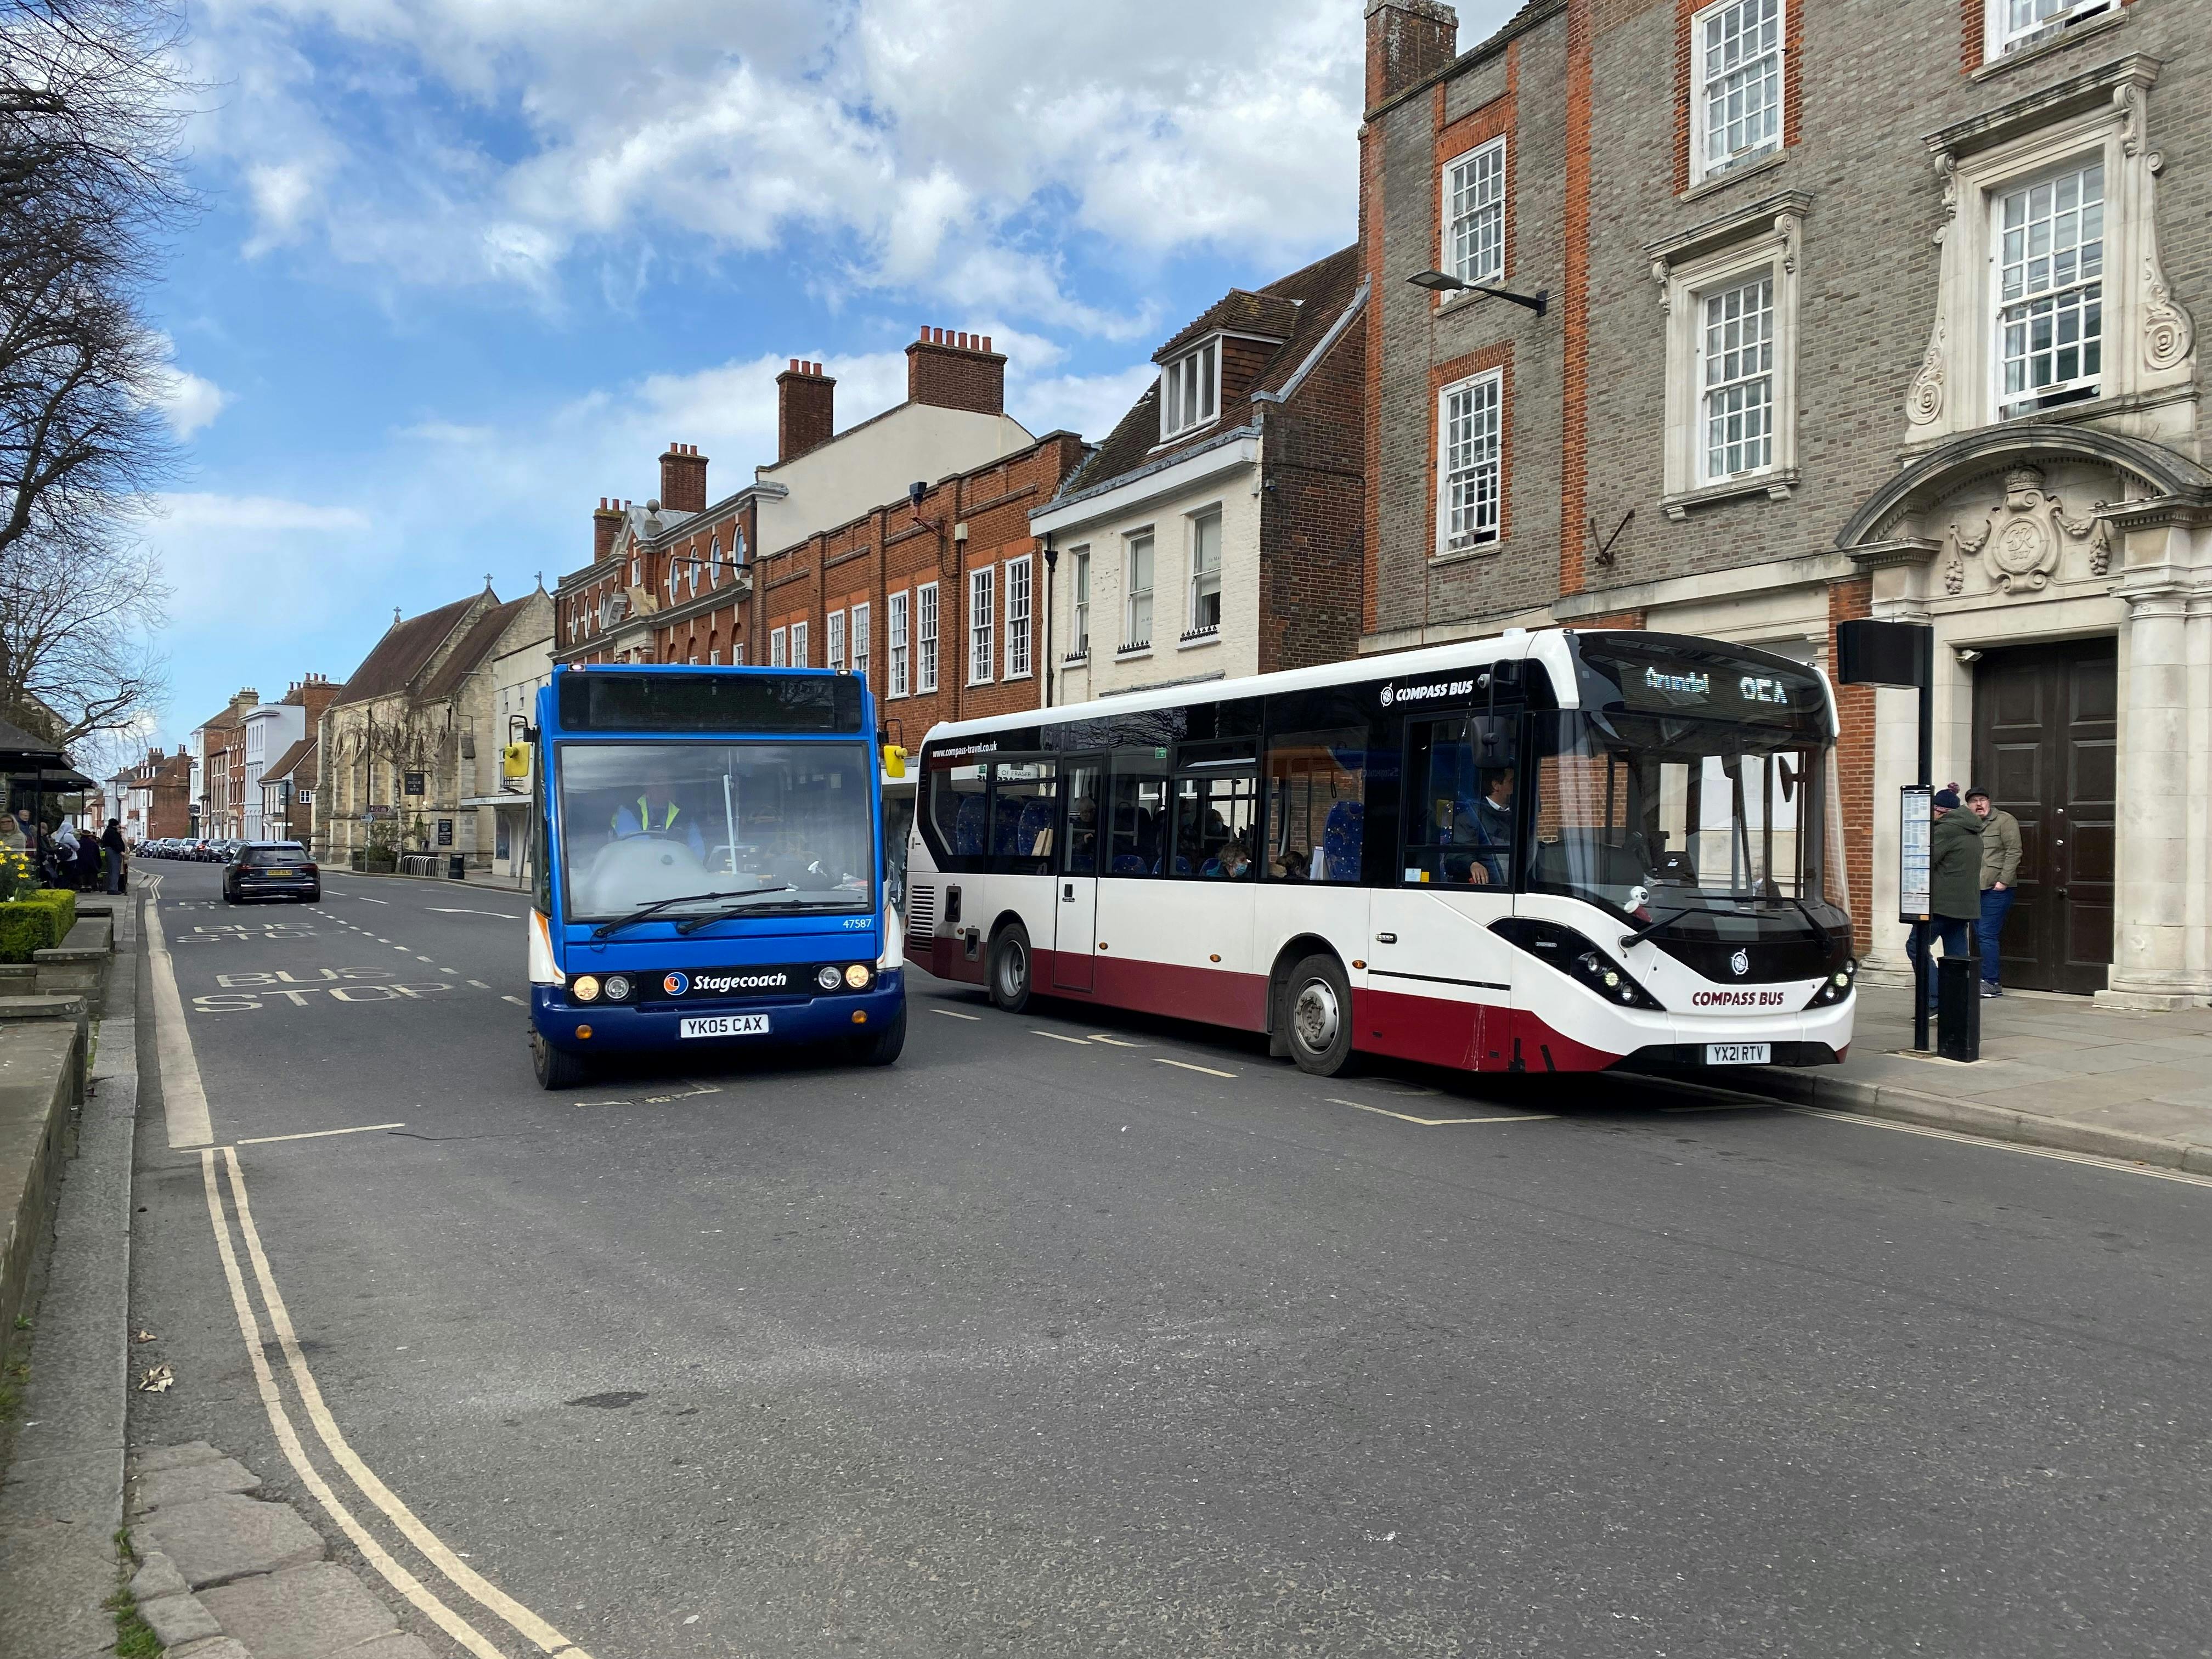 Buses, West Street, Chichester